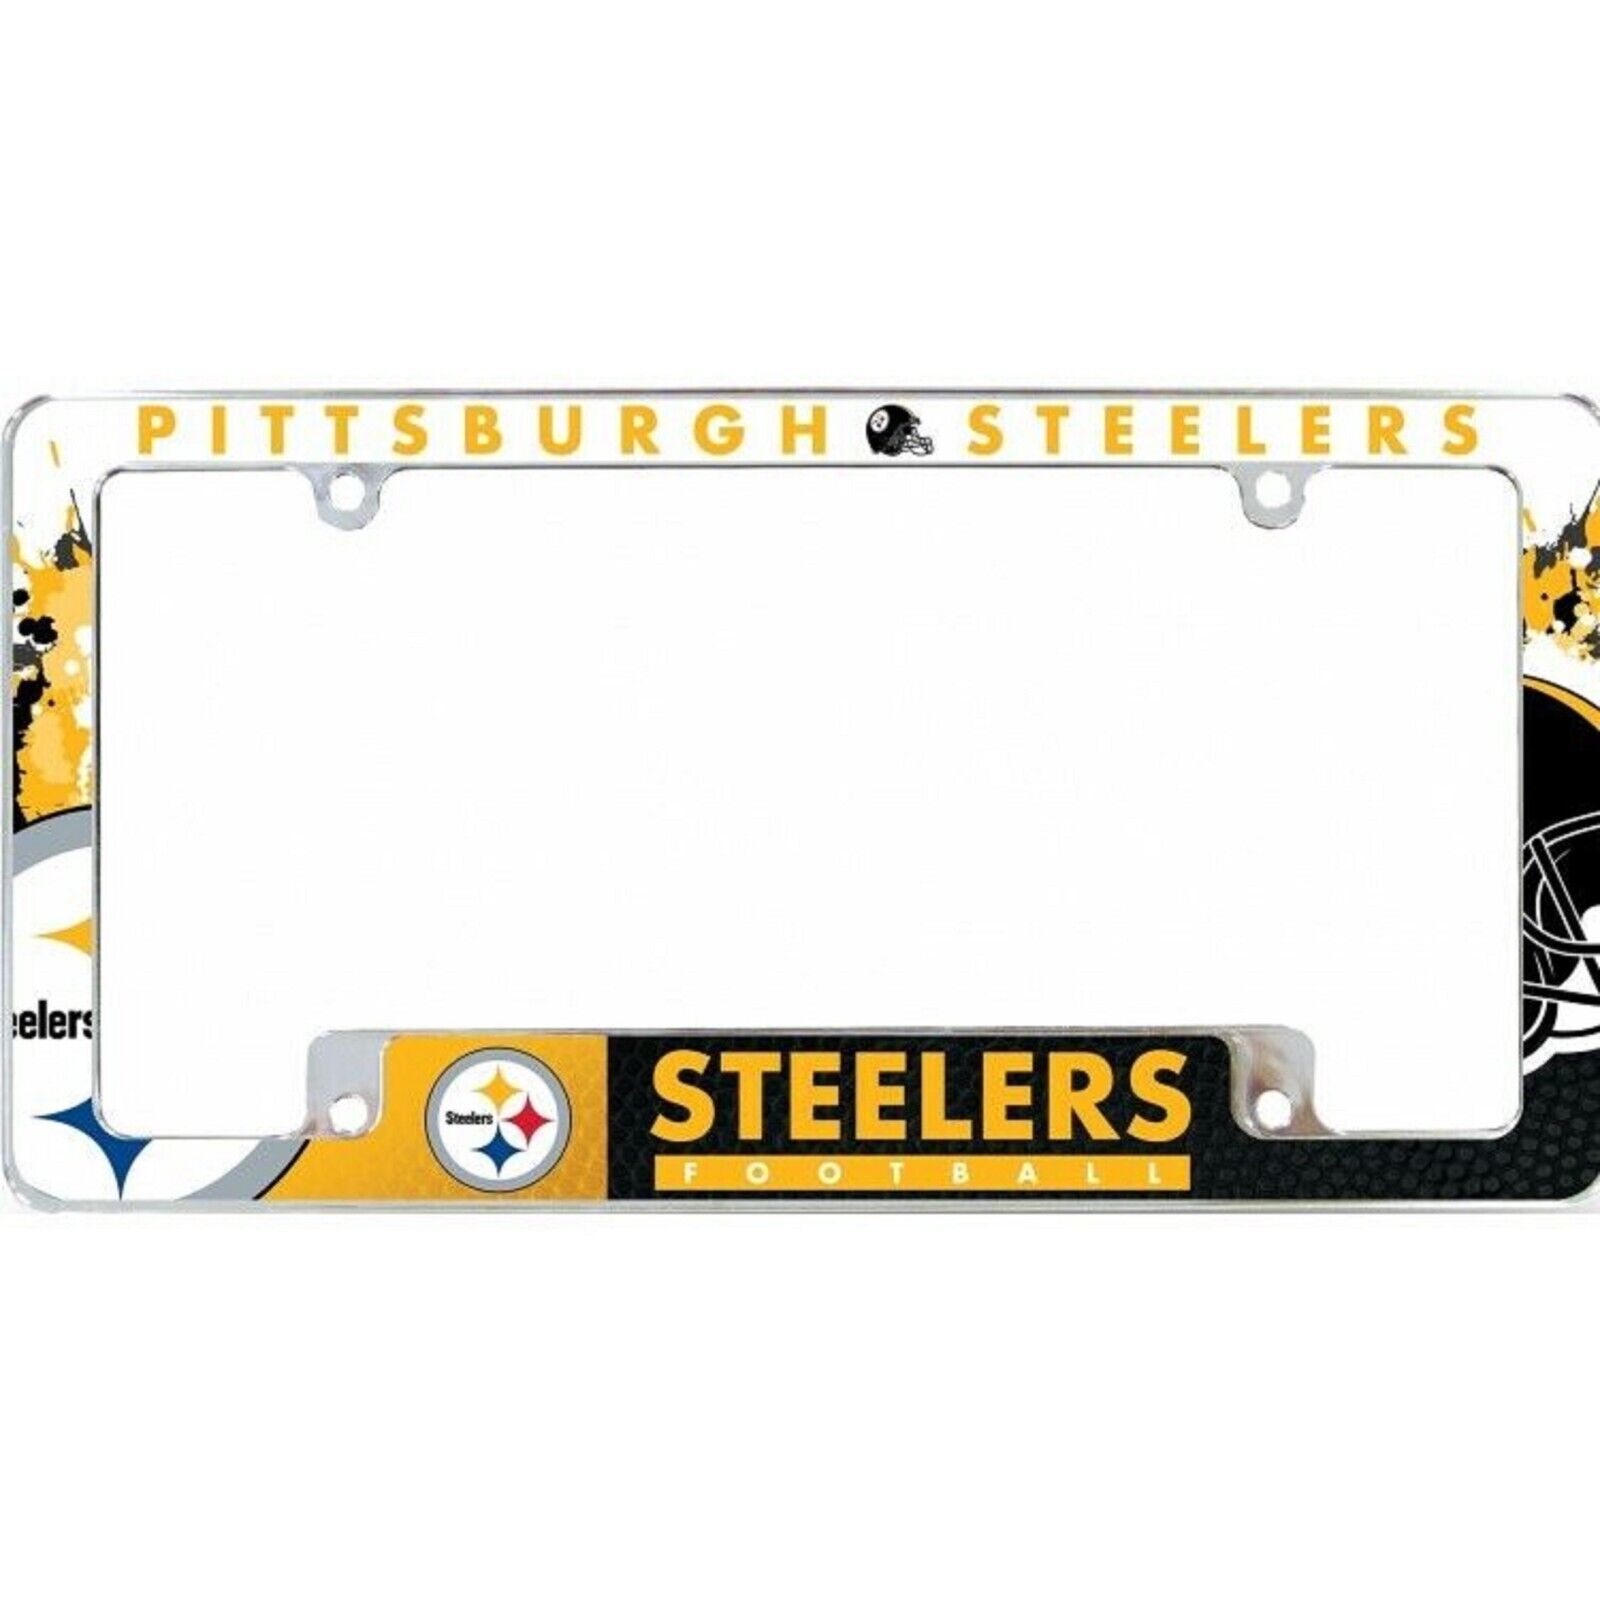 pittsburgh steelers all over nfl football team logo license plate frame usa made